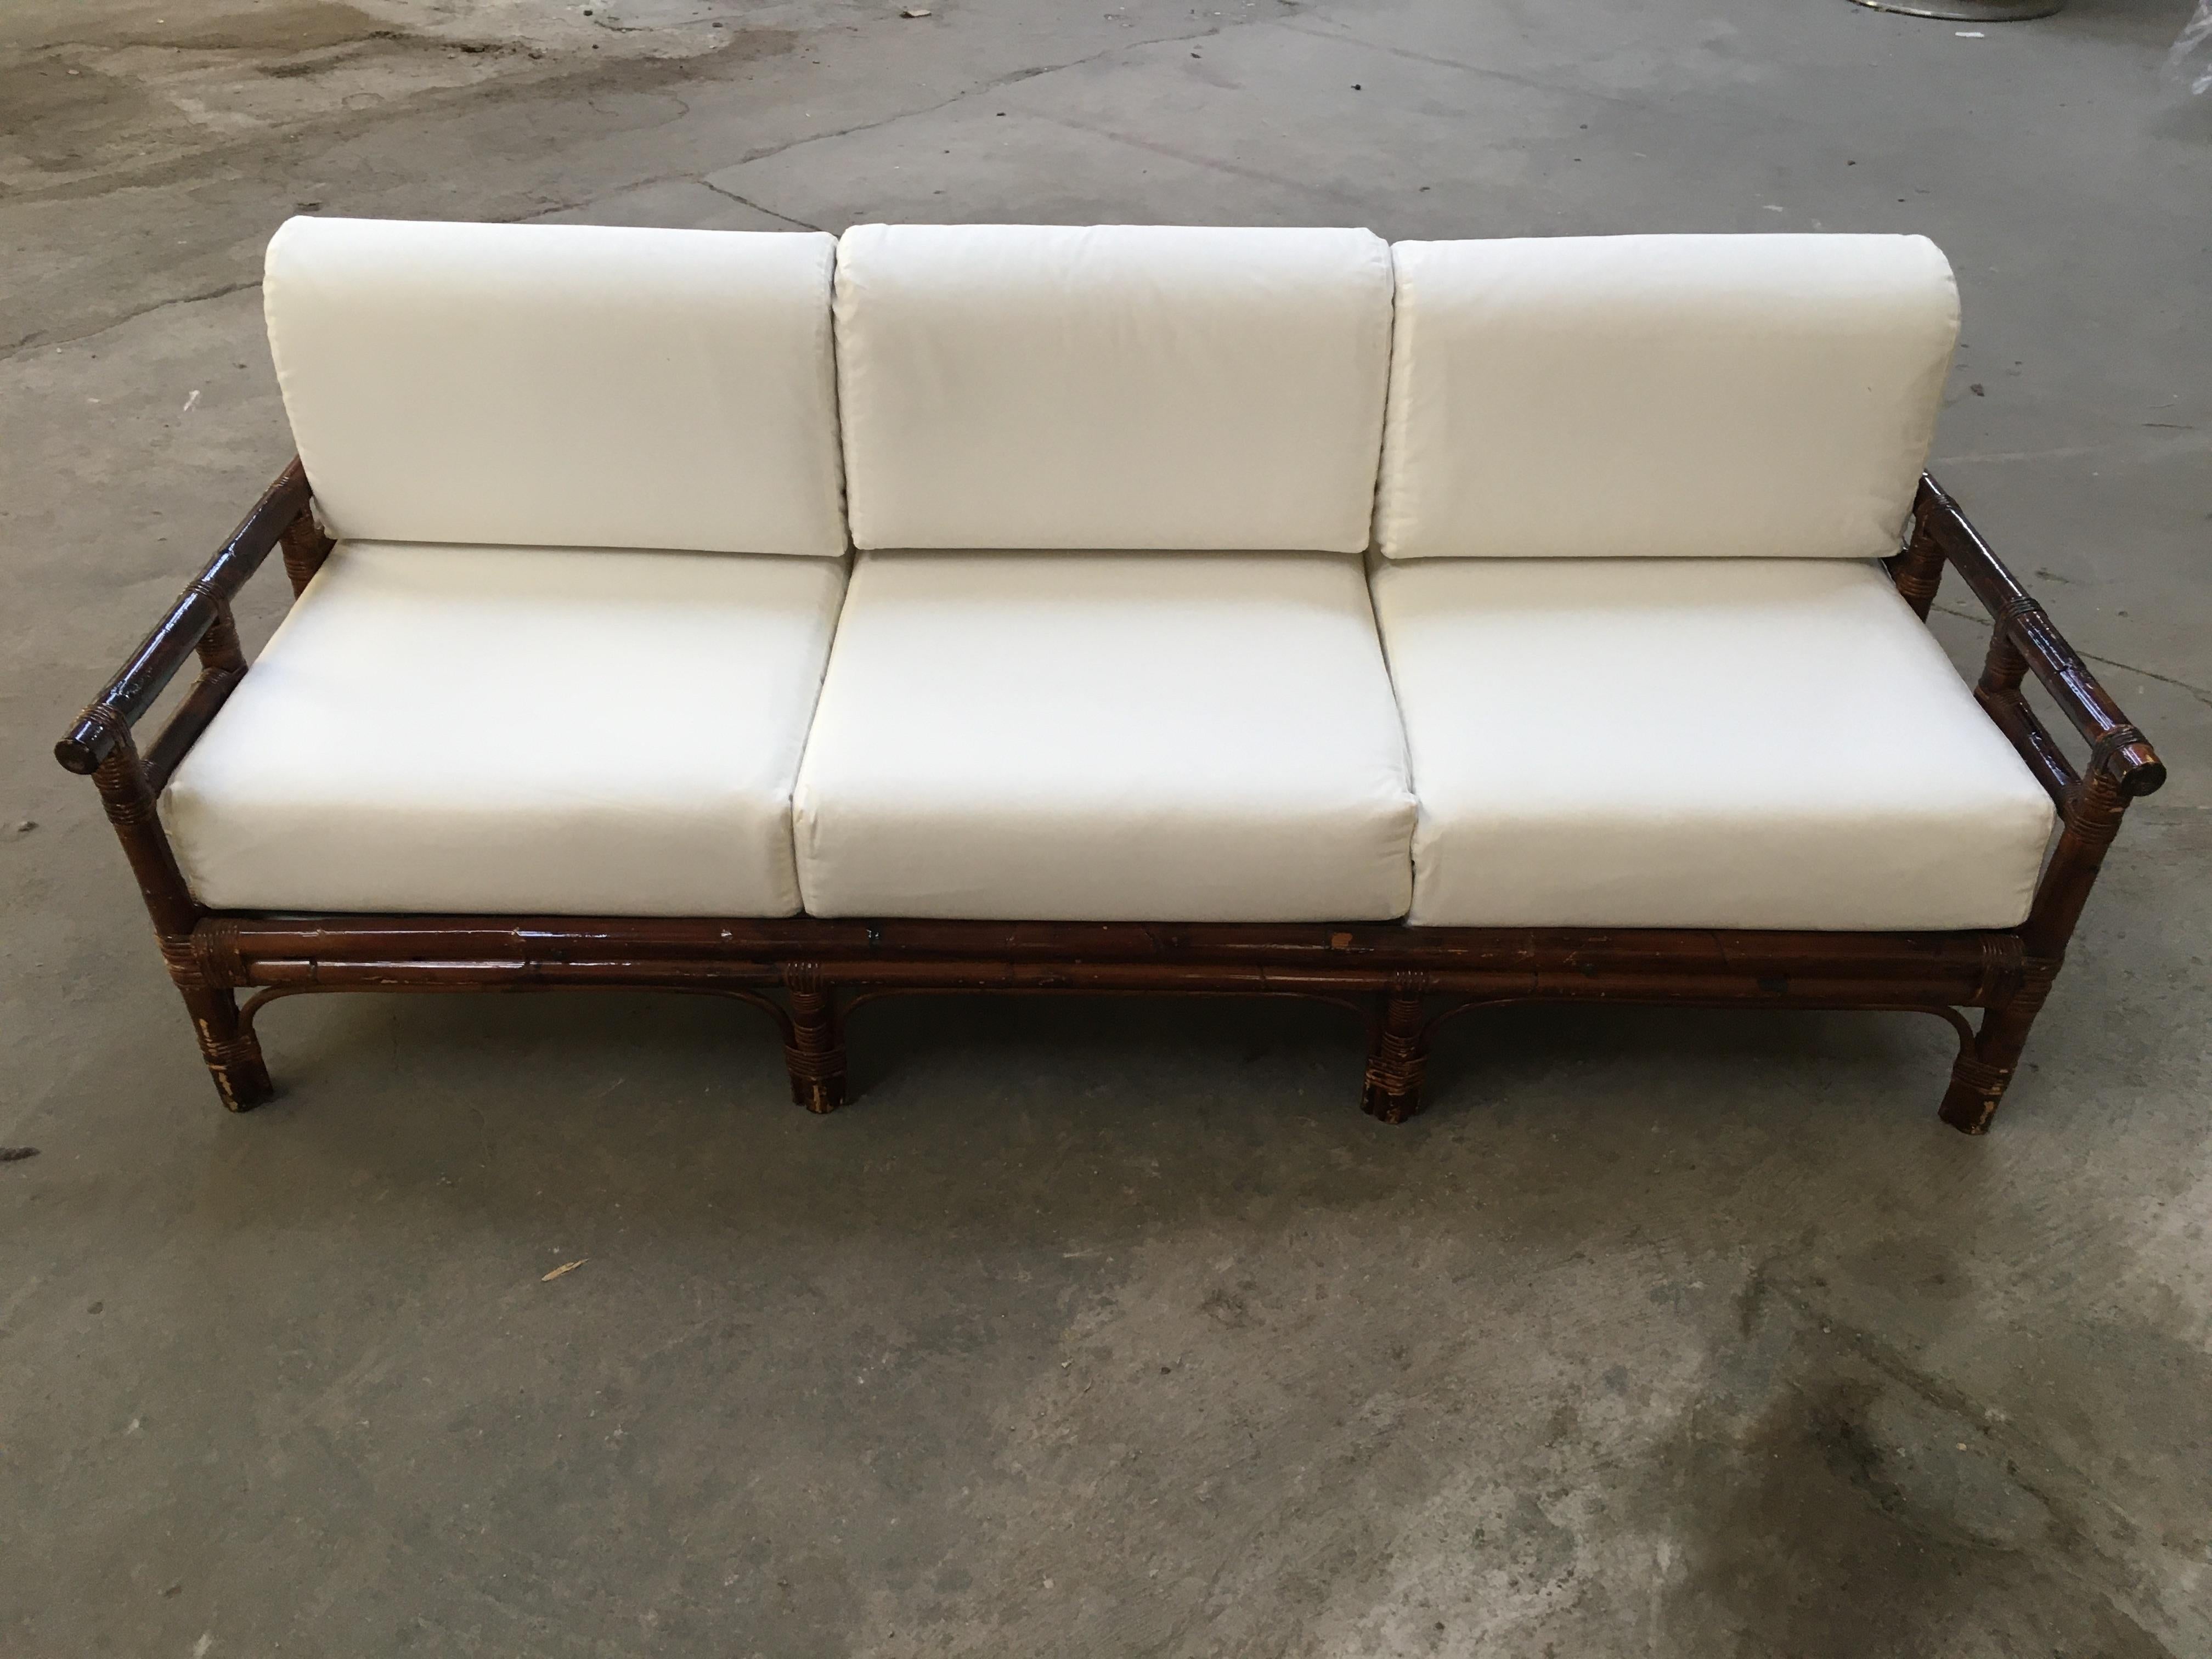 Mid-Century Modern Italian three-seat bamboo sofa with reupholstered cushions from 1970s.
The cushions have been covered with white cotton to give the chance to recover them with the right selected fabric.
  